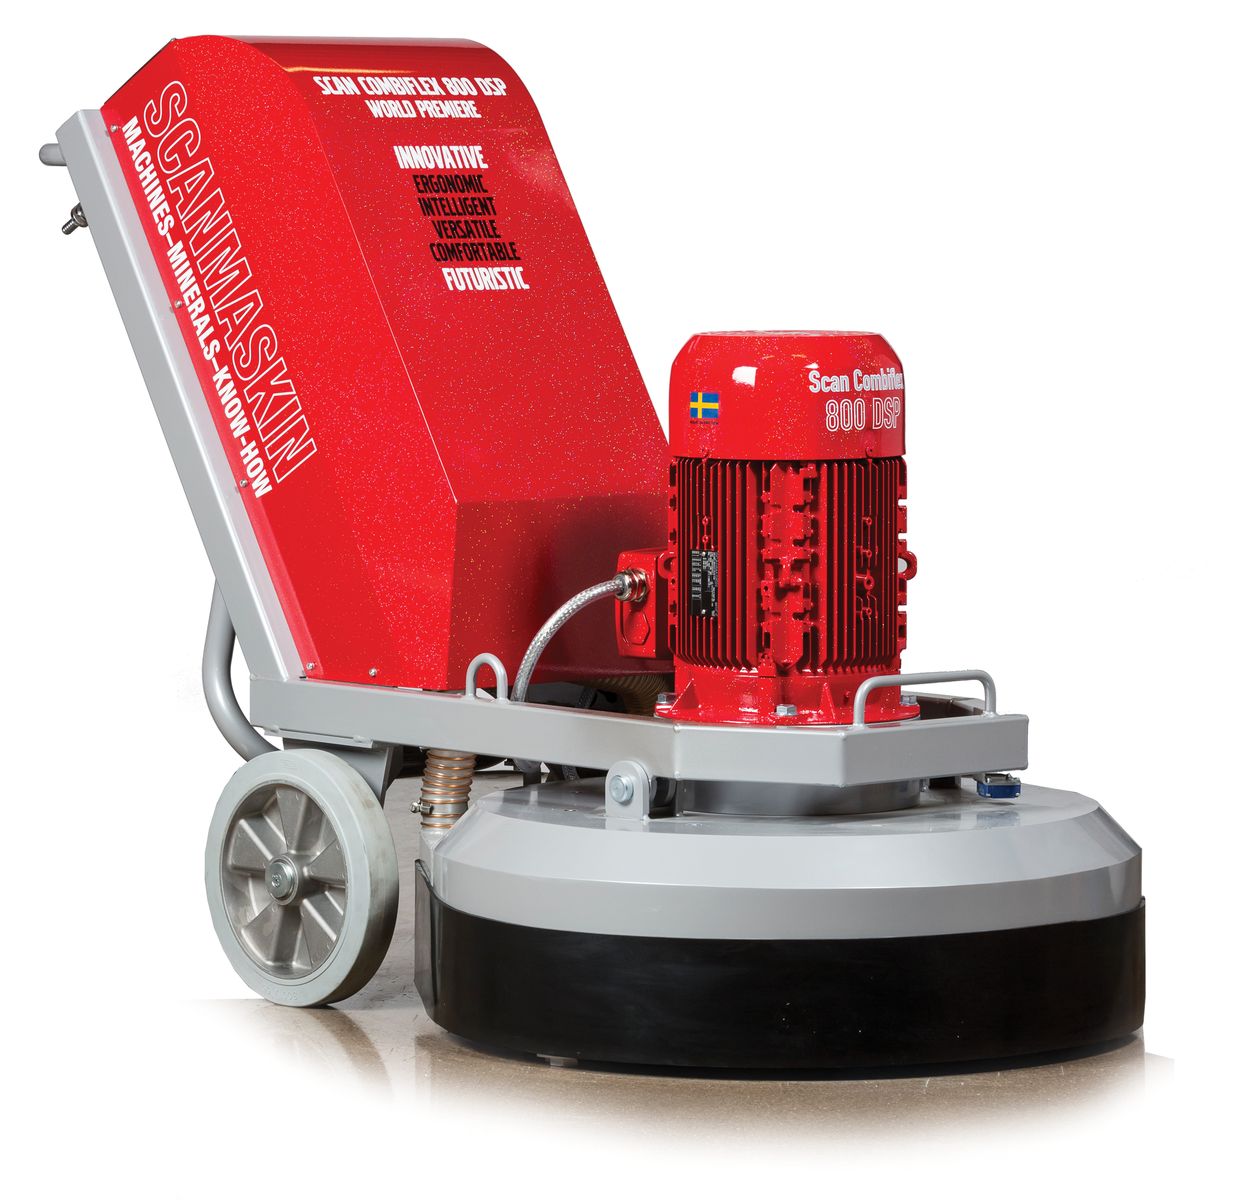 Swedish Scanmaskin's world launch of new grinder at World of Concrete